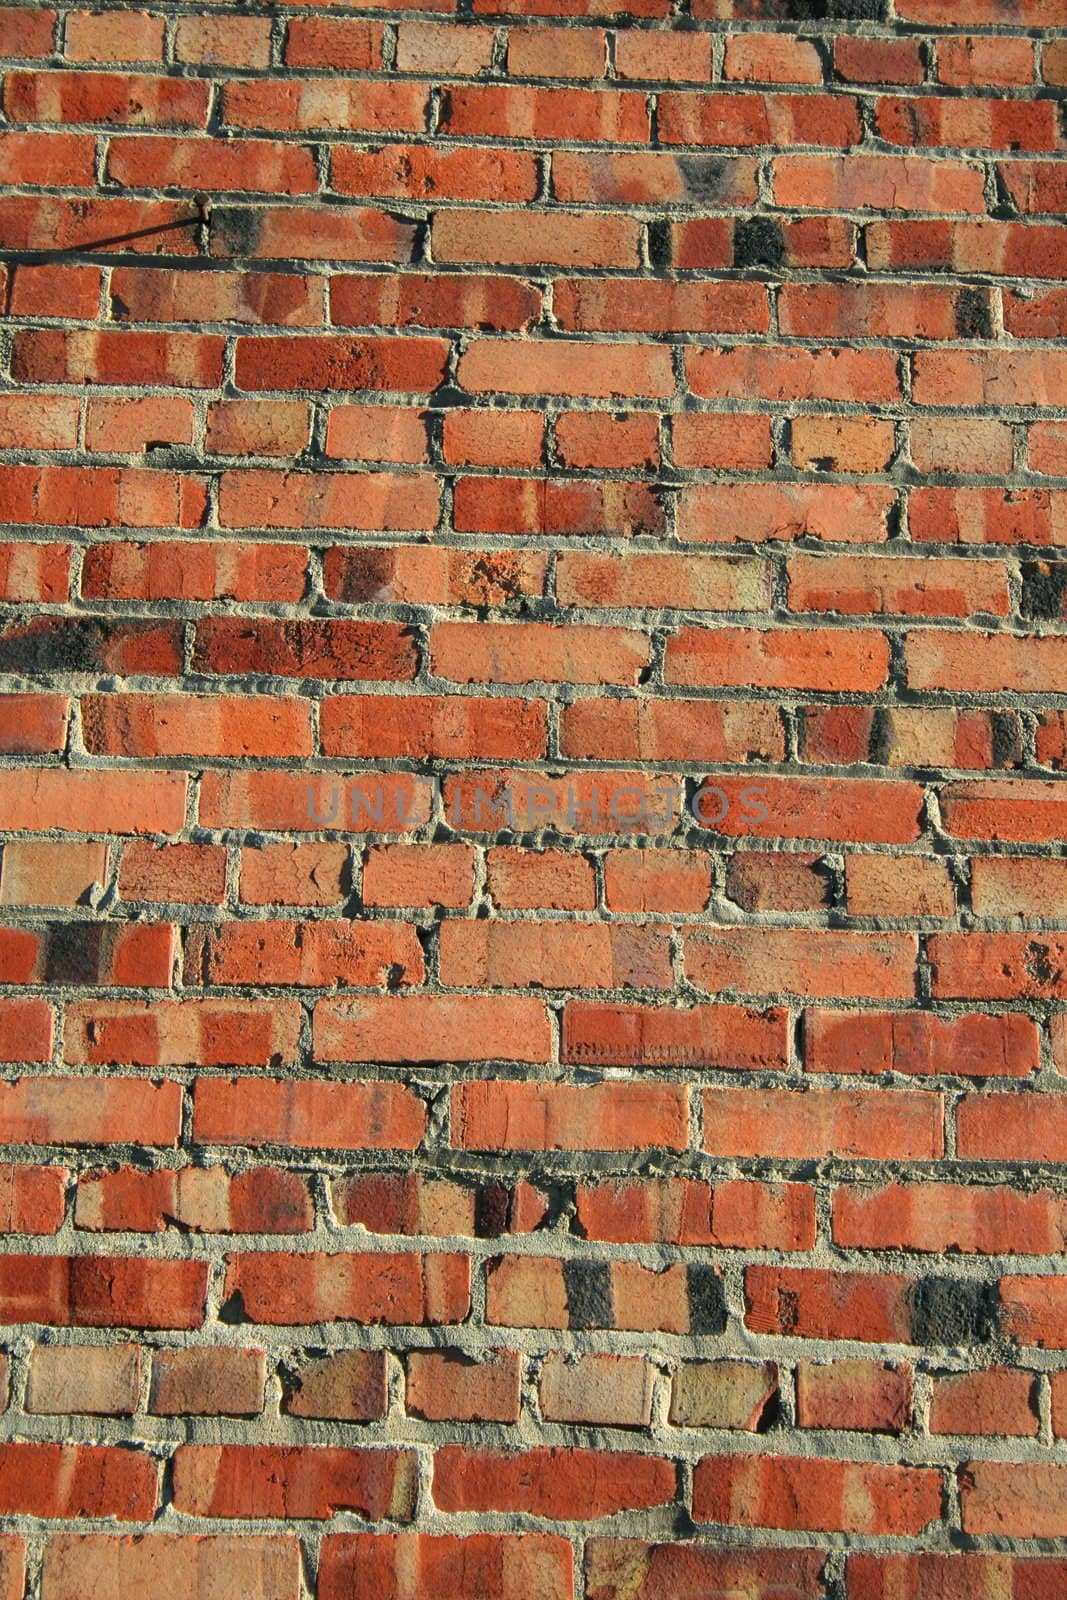 Brickwall over blue sky showing unique pattern.
